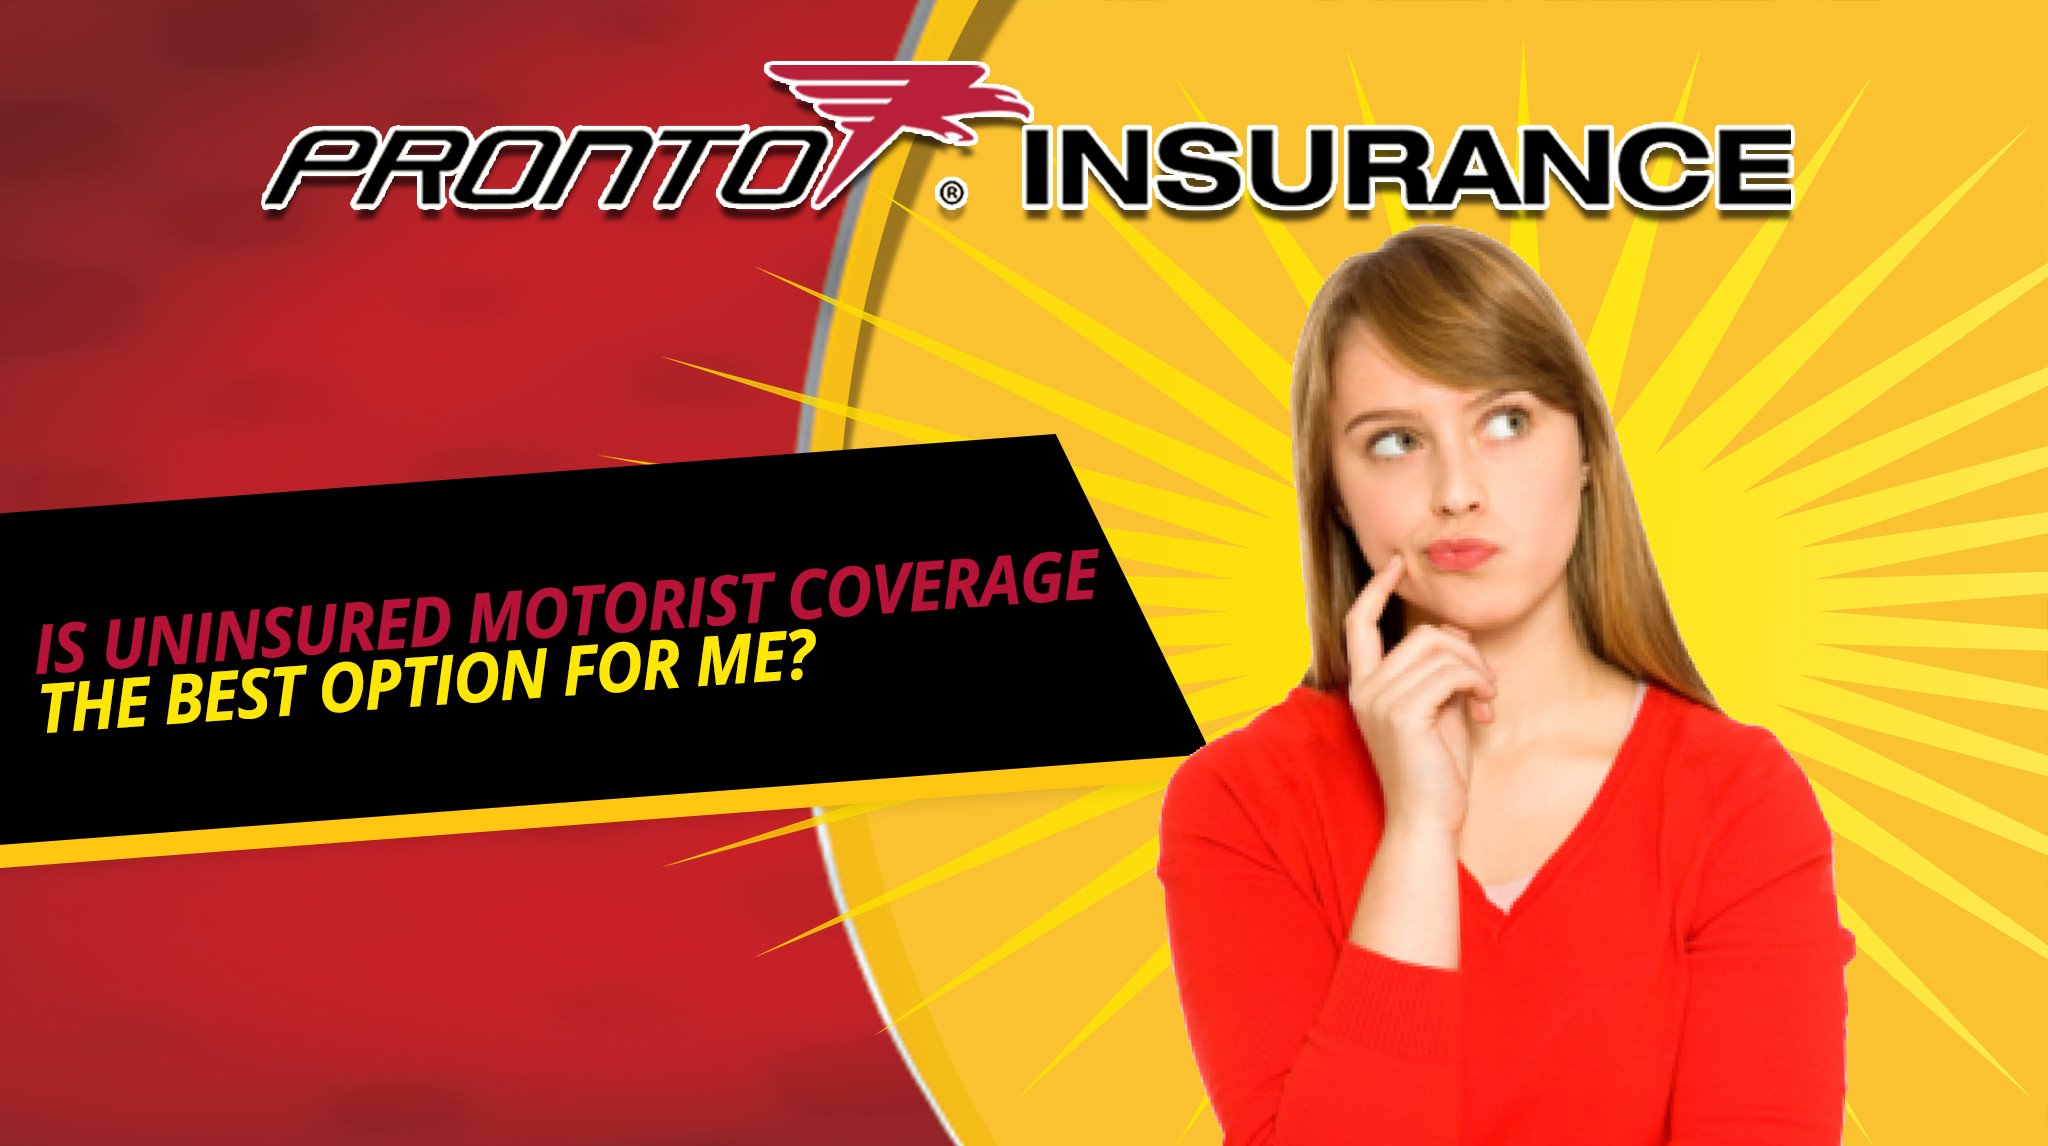 Is Uninsured Motorist Coverage the Best Option for Me?